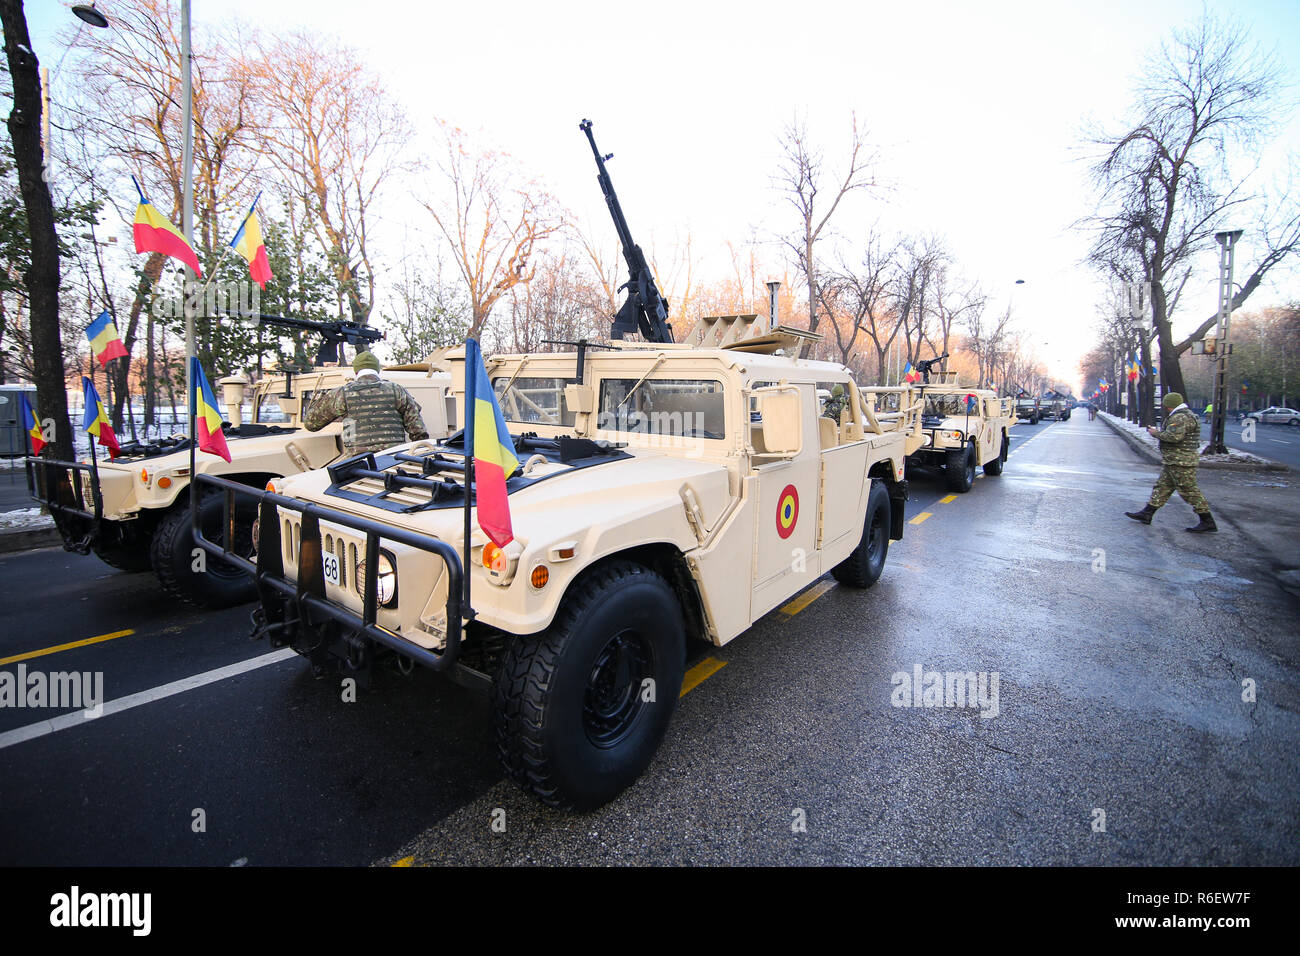 BUCHAREST, ROMANIA - December 1, 2018: Humvee military vehicle from the Romanian army at Romanian National Day military parade Stock Photo